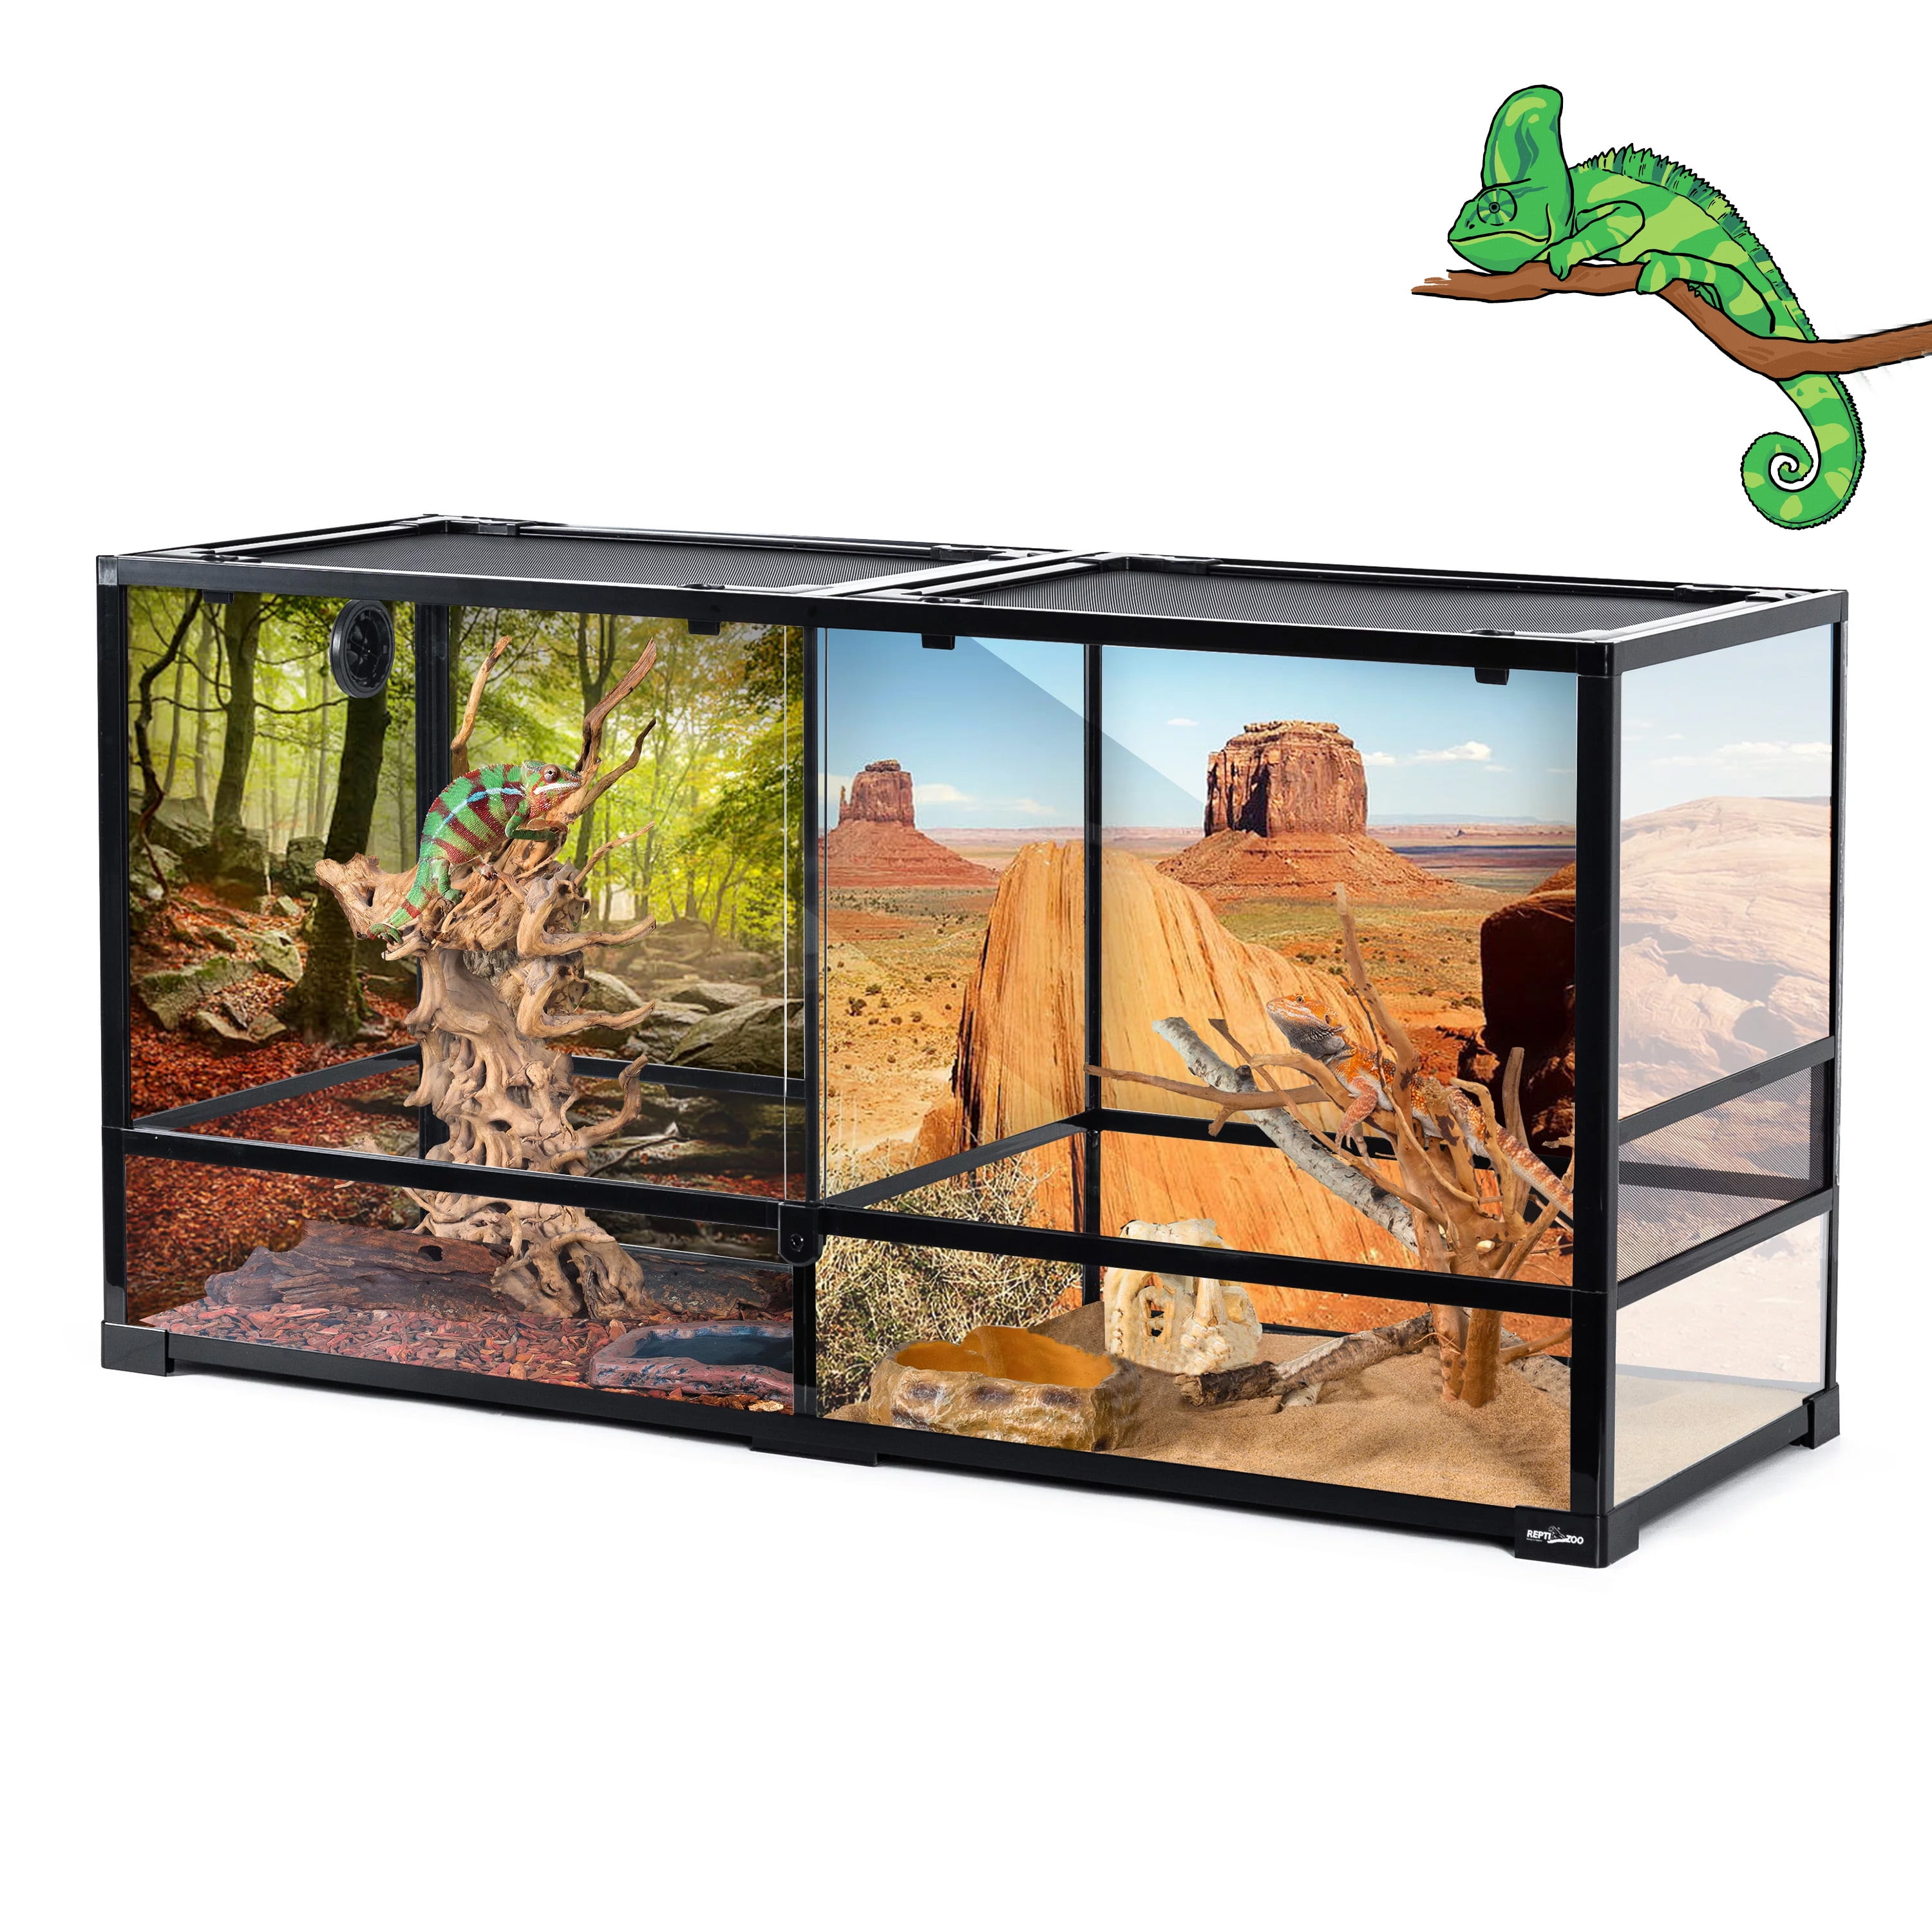 debat Shipley afslappet 90 Gallon Glass Terrarium with Divider for Reptiles,Reptile Tank with  Double Hinge Door & Screen Ventilation, Supporting Used as 2 Separate  Habitats Easy Assembly - Walmart.com